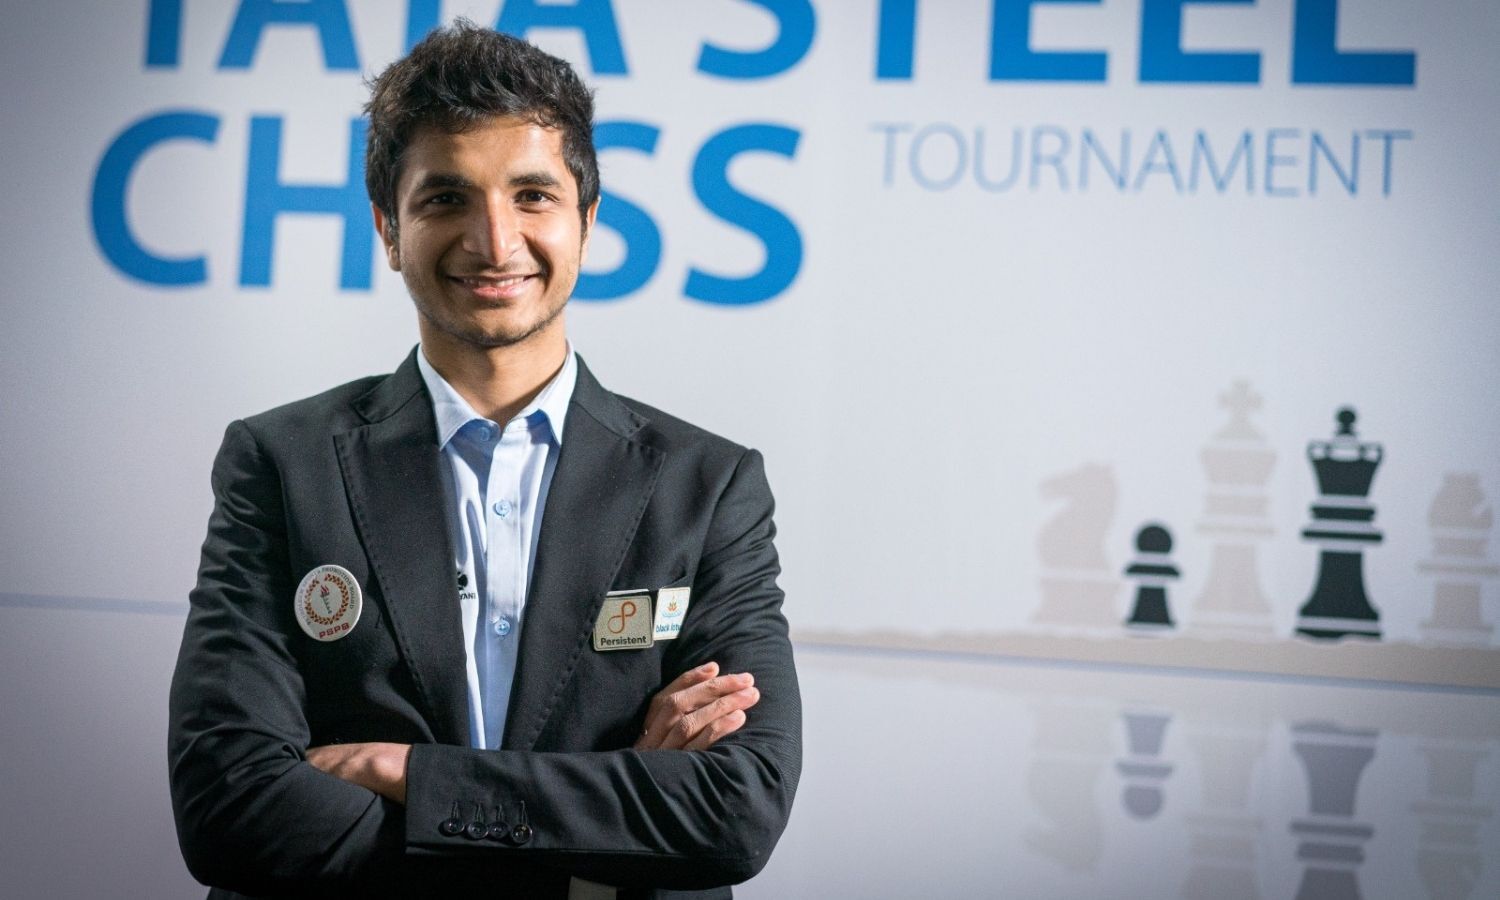 Tata Steel Chess - Next up, Richard Rapport. Richard is one of the